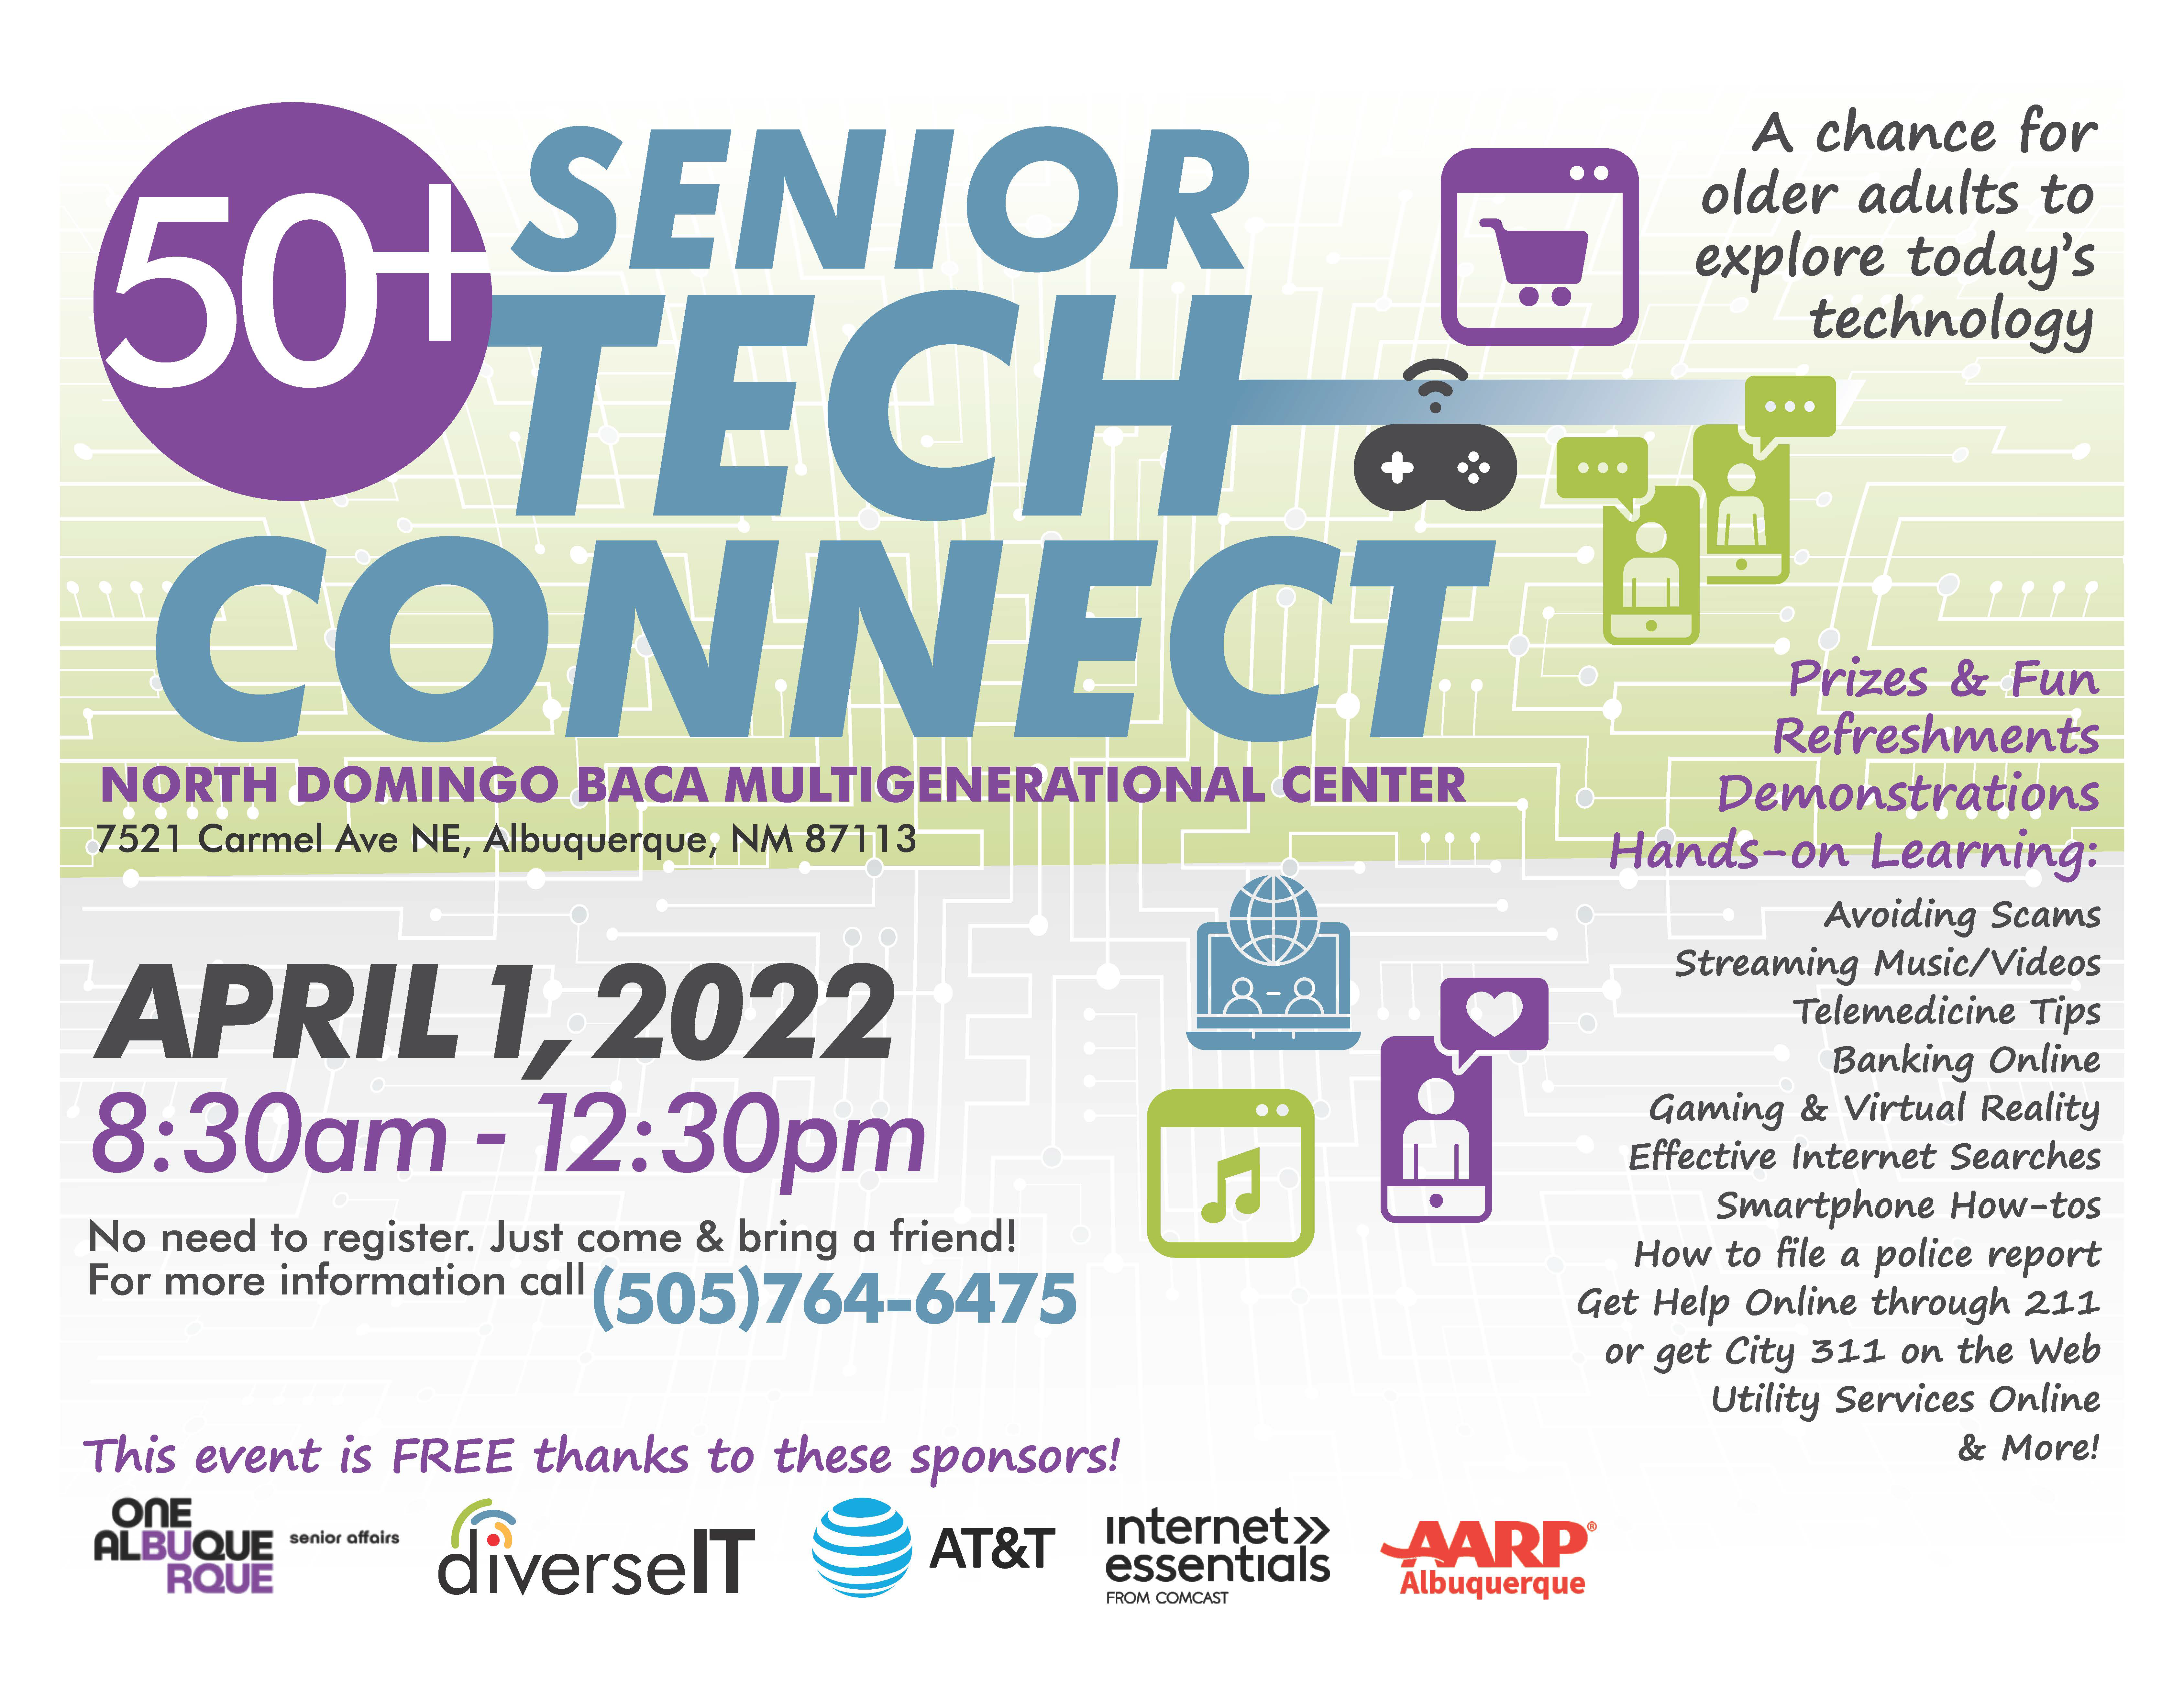 50+ Senior Tech Connect. A chance for older adults to explore today's technology.